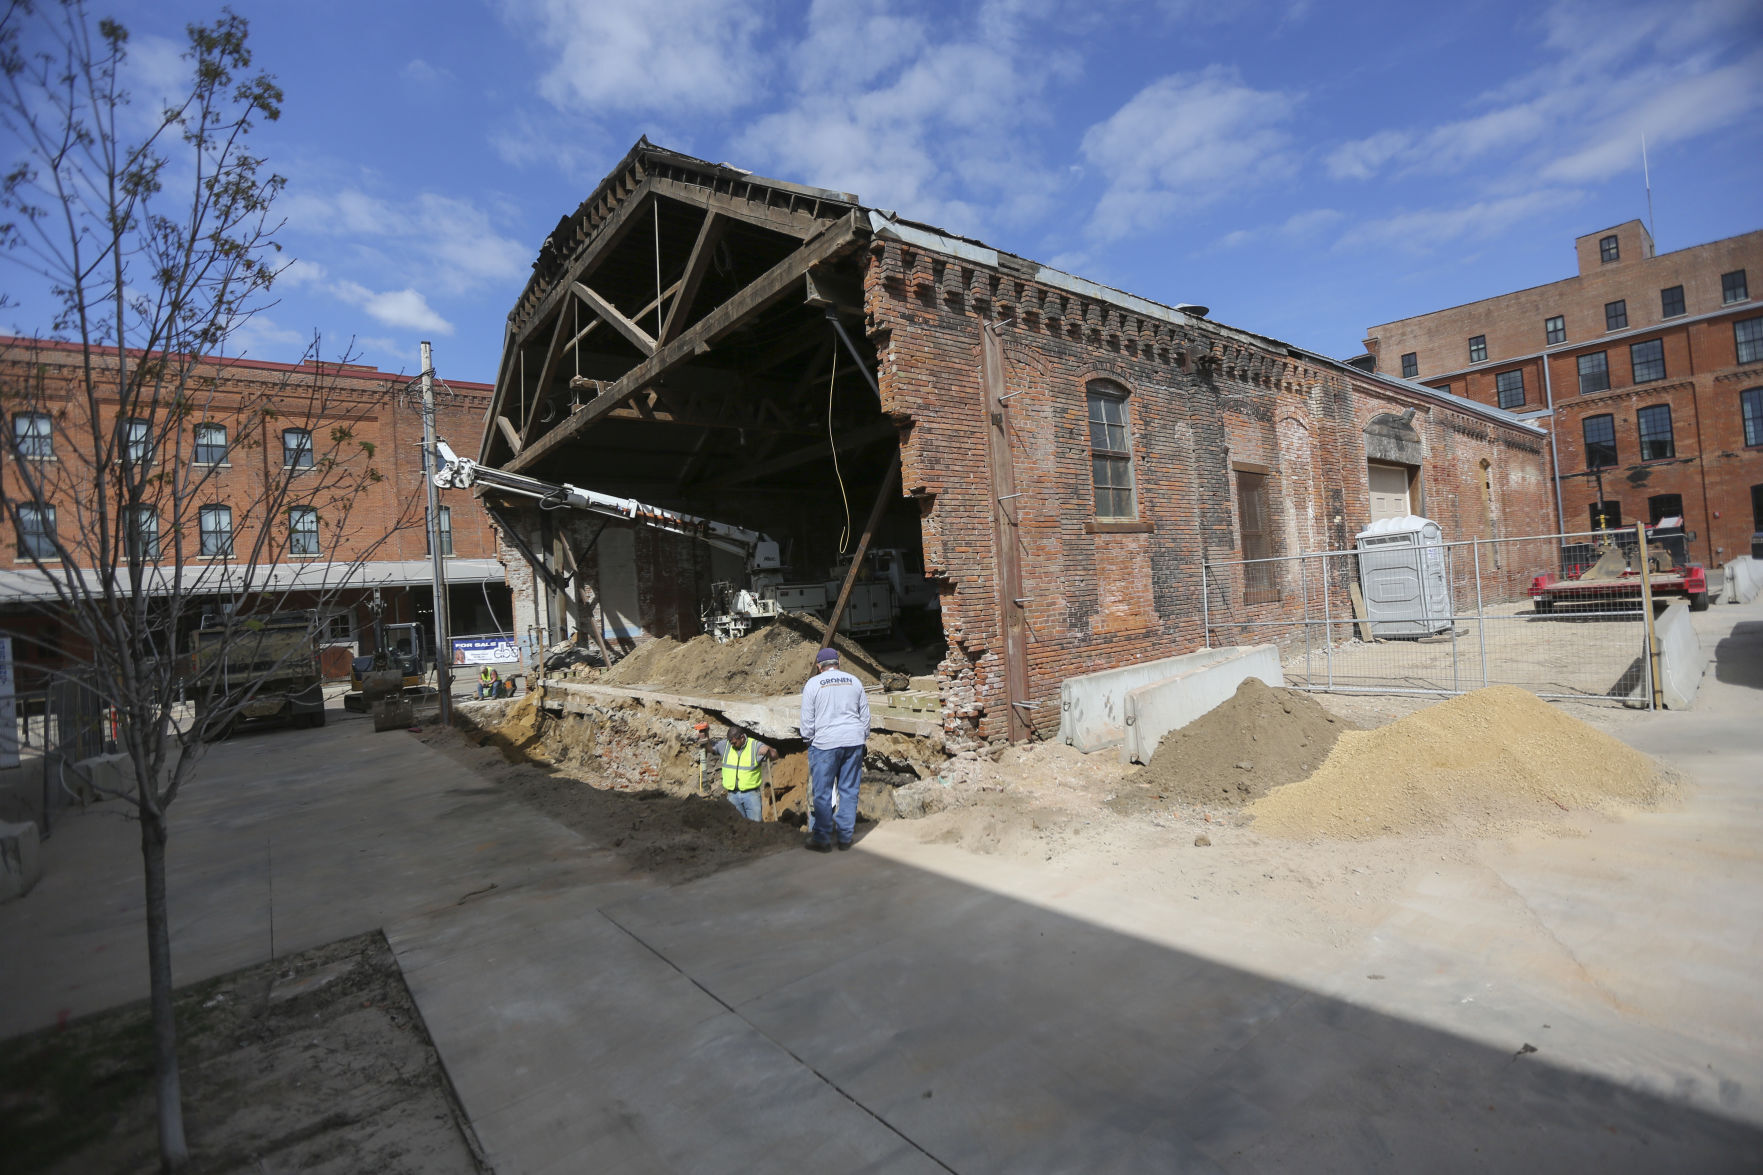 Crews work on the Rouse & Dean Foundry building at the corner of Washington and East 10th streets in Dubuque. PHOTO CREDIT: Dave Kettering